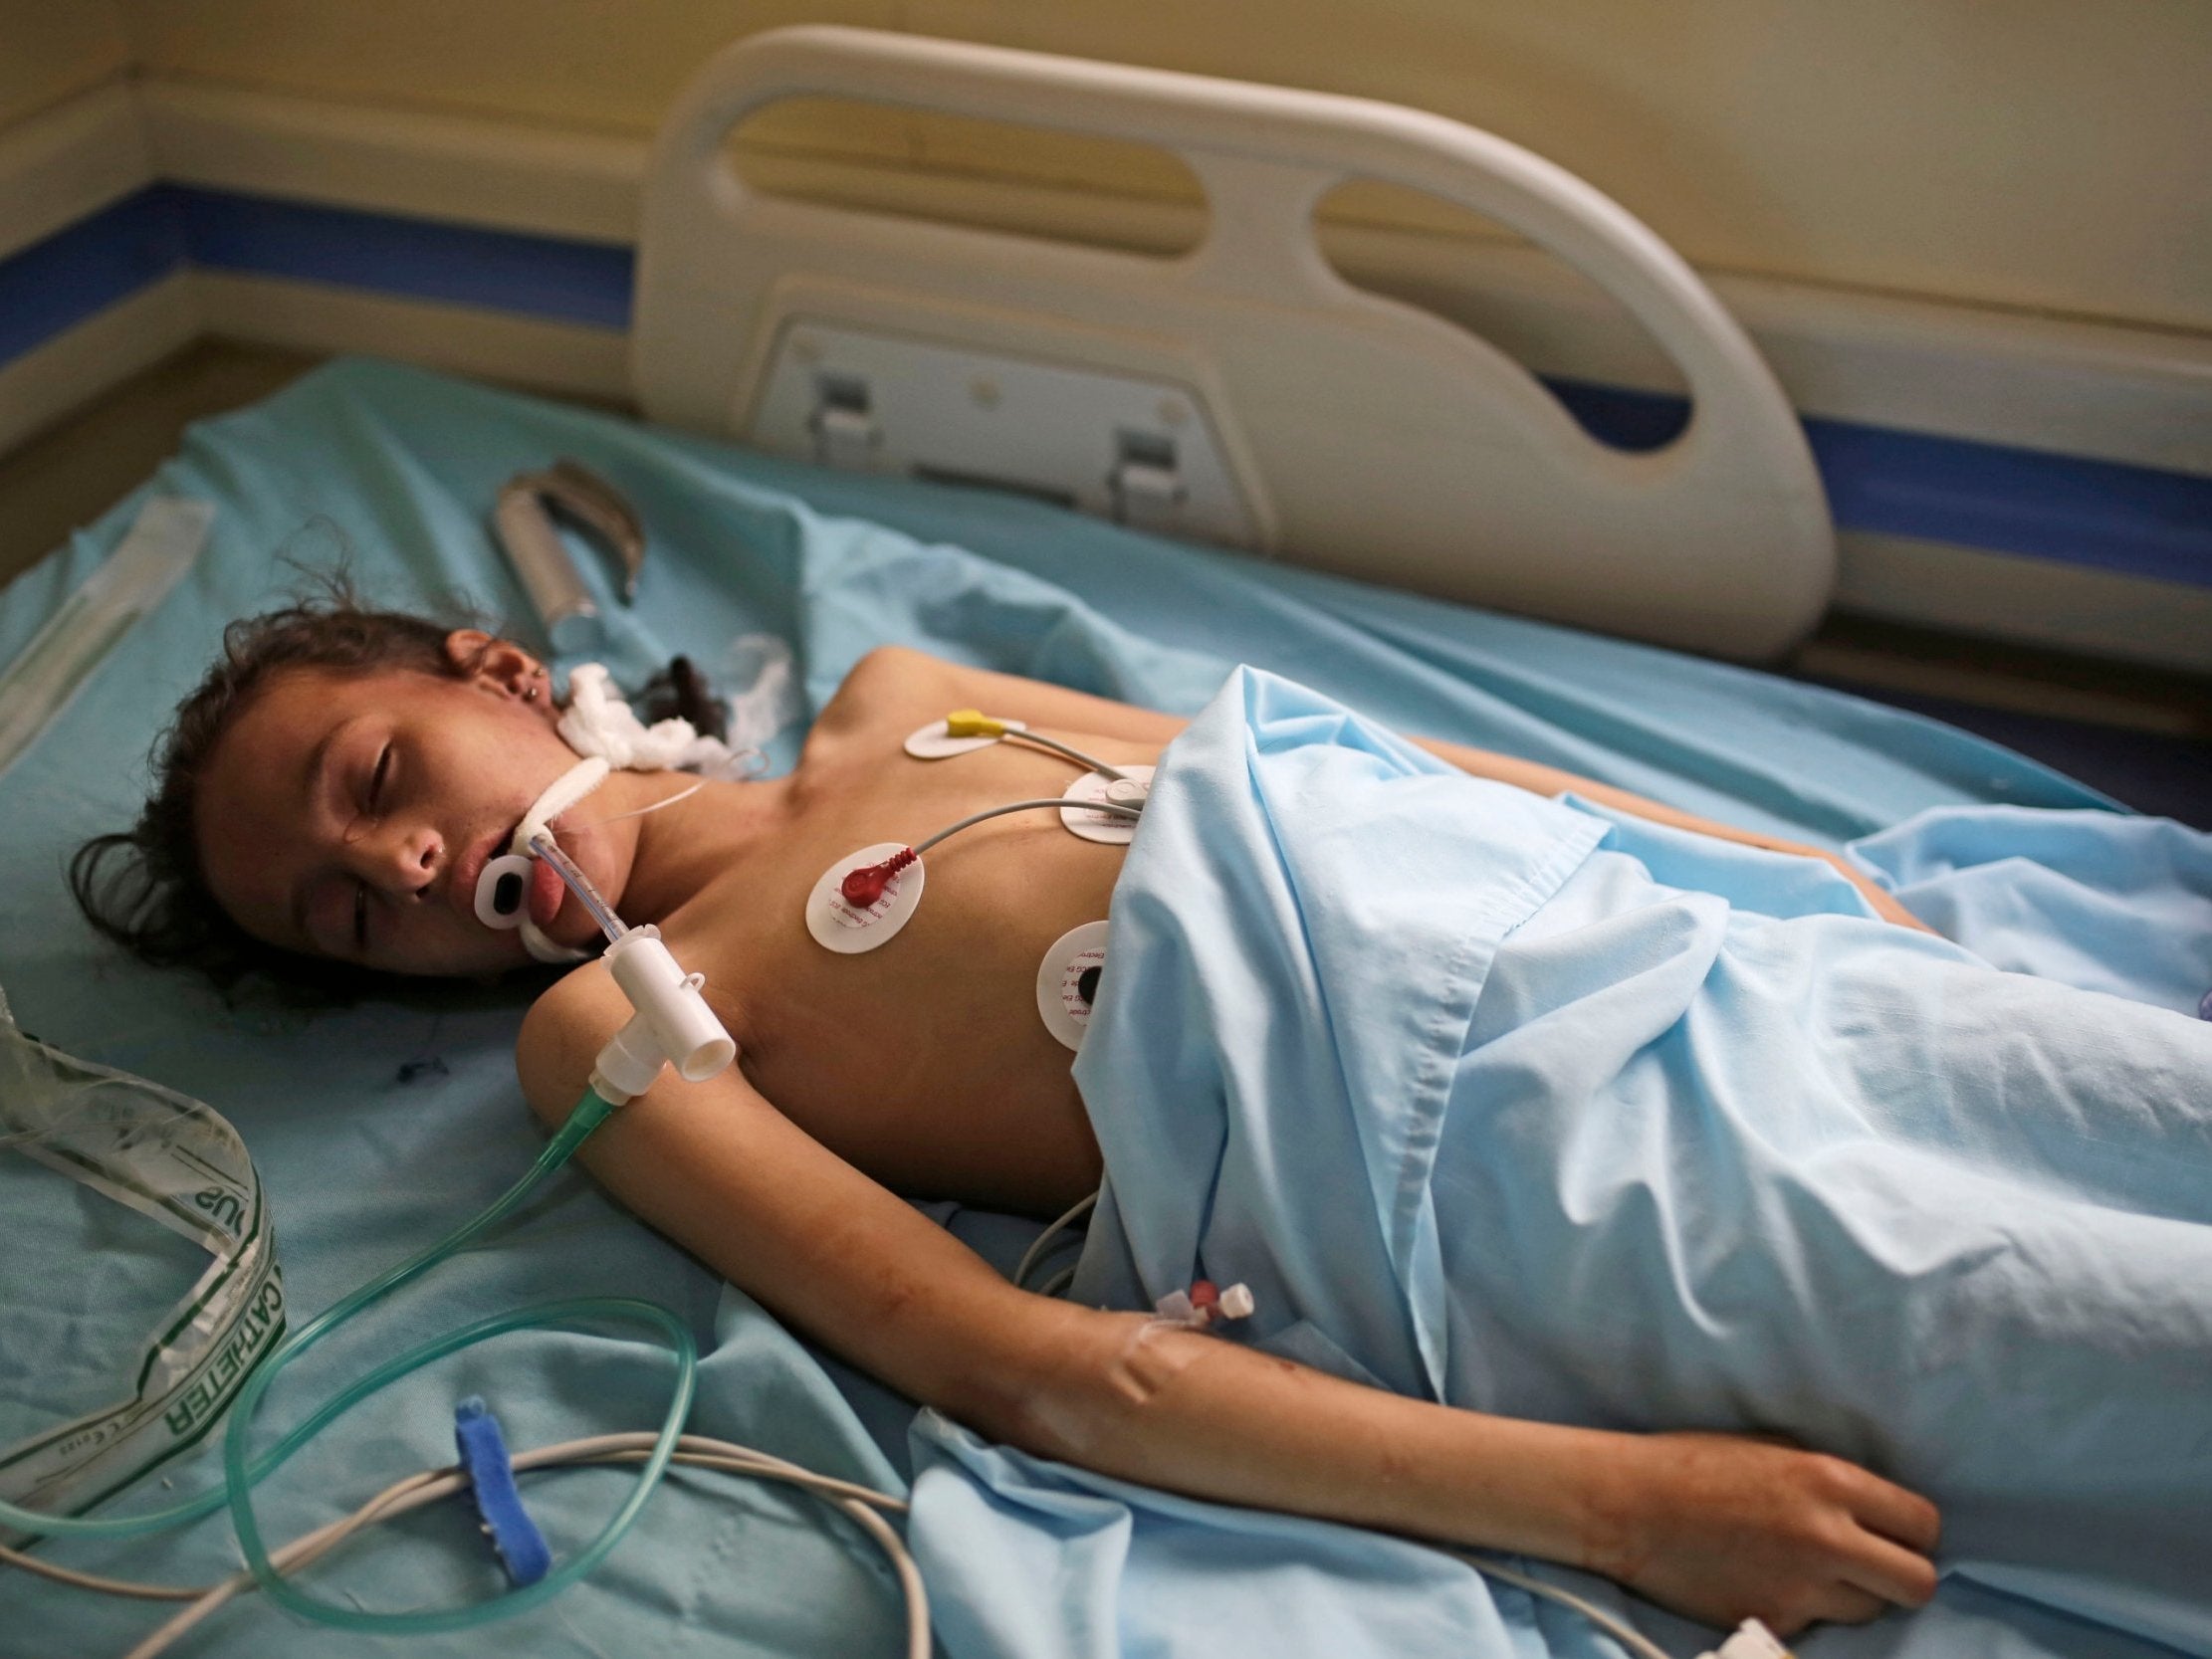 A Yemeni girl injured in the explosion lies in a hospital bed in Sanaa